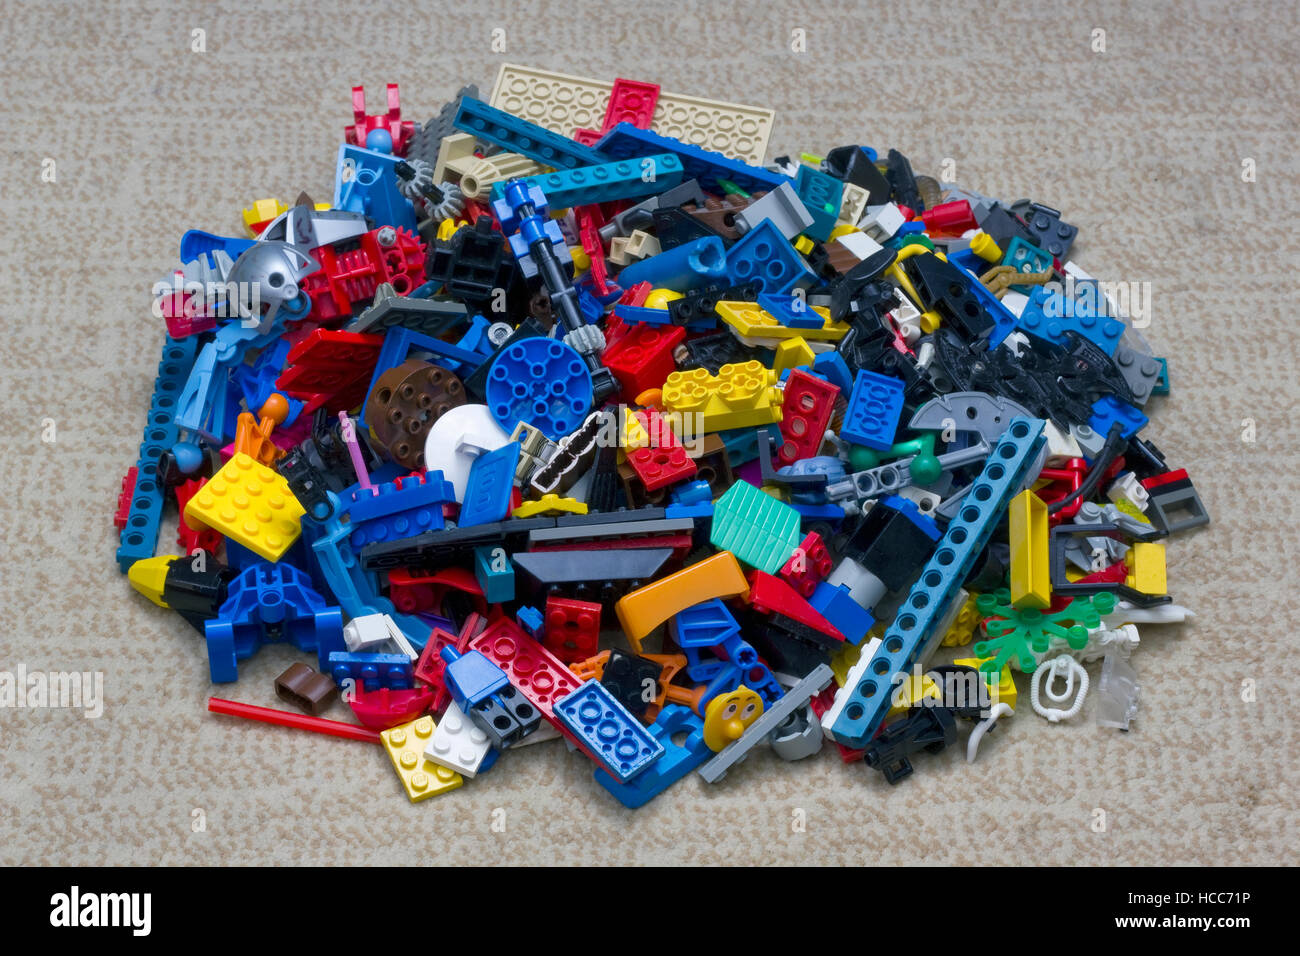 VILNIUS,  LITHUANIA - NOVEMBER 12, 2016: On a carpet in the nursery a heap of Lego toy blosks and elements. Lego Group began manufacturing the interlo Stock Photo